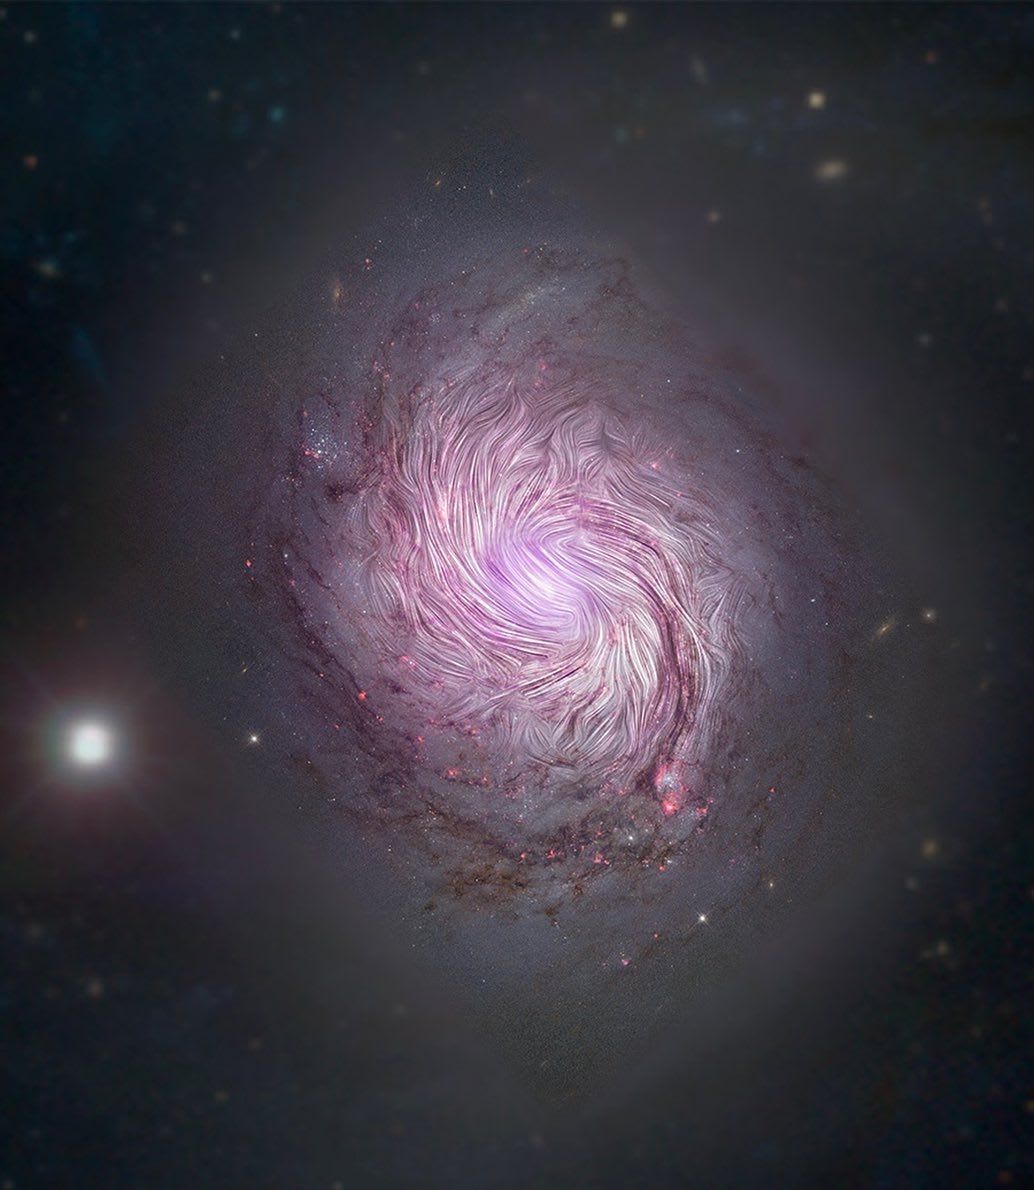 😍 Far-infrared light reveals magnetic fields in galaxy NGC 1068, aligning along the entire 24,000 light years of length of its massive spiral arms - suggesting gravitational forces that created the galaxy’s shape are also compressing its magnetic field. 📸 :